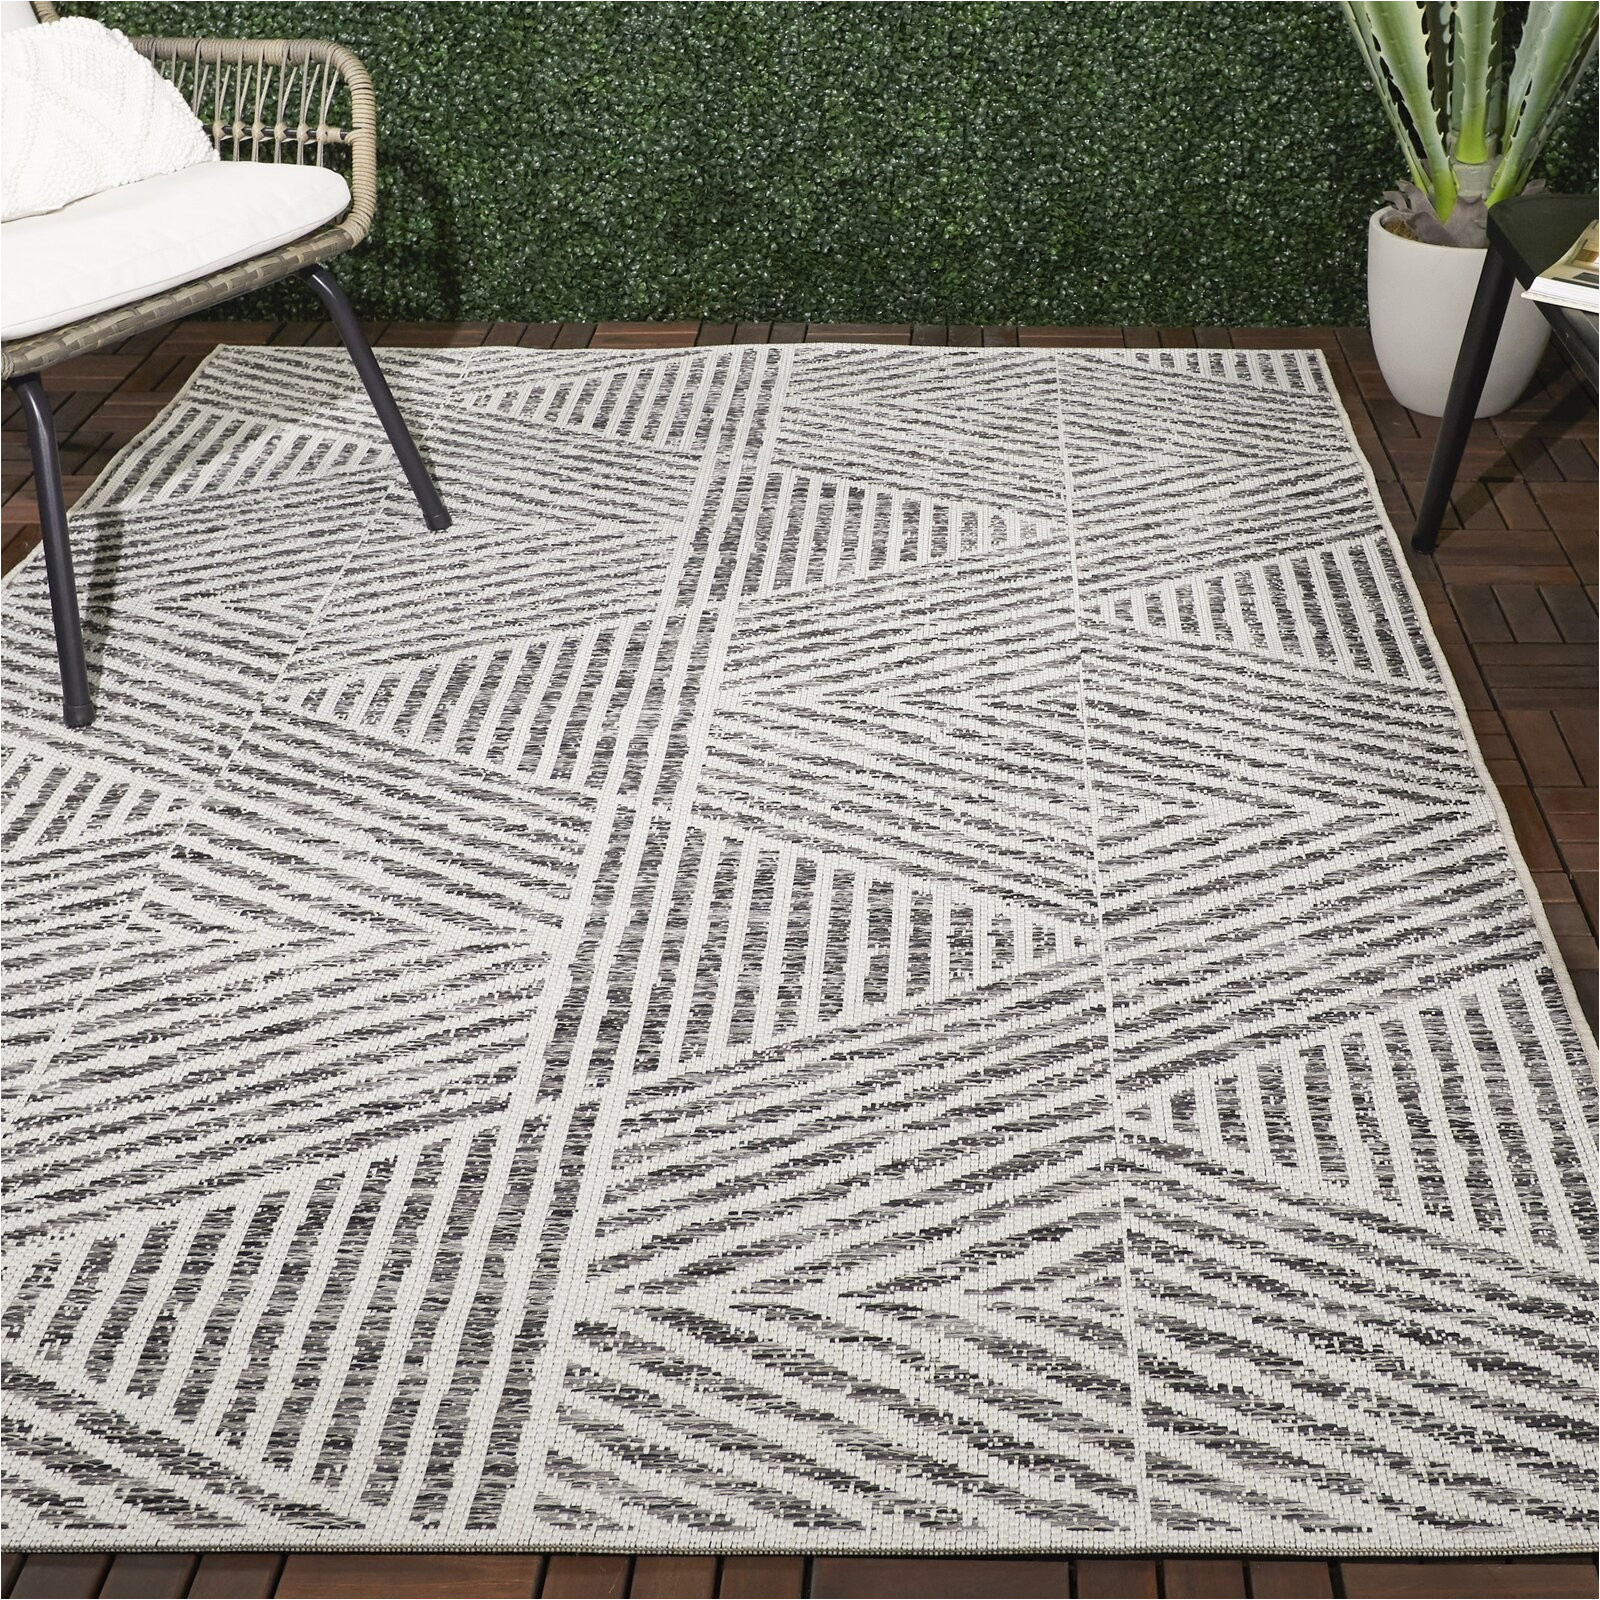 Best Outdoor Rugs for Pool area the Best Outdoor Rugs for 2021 – Rugs You’ll Love – Lonny